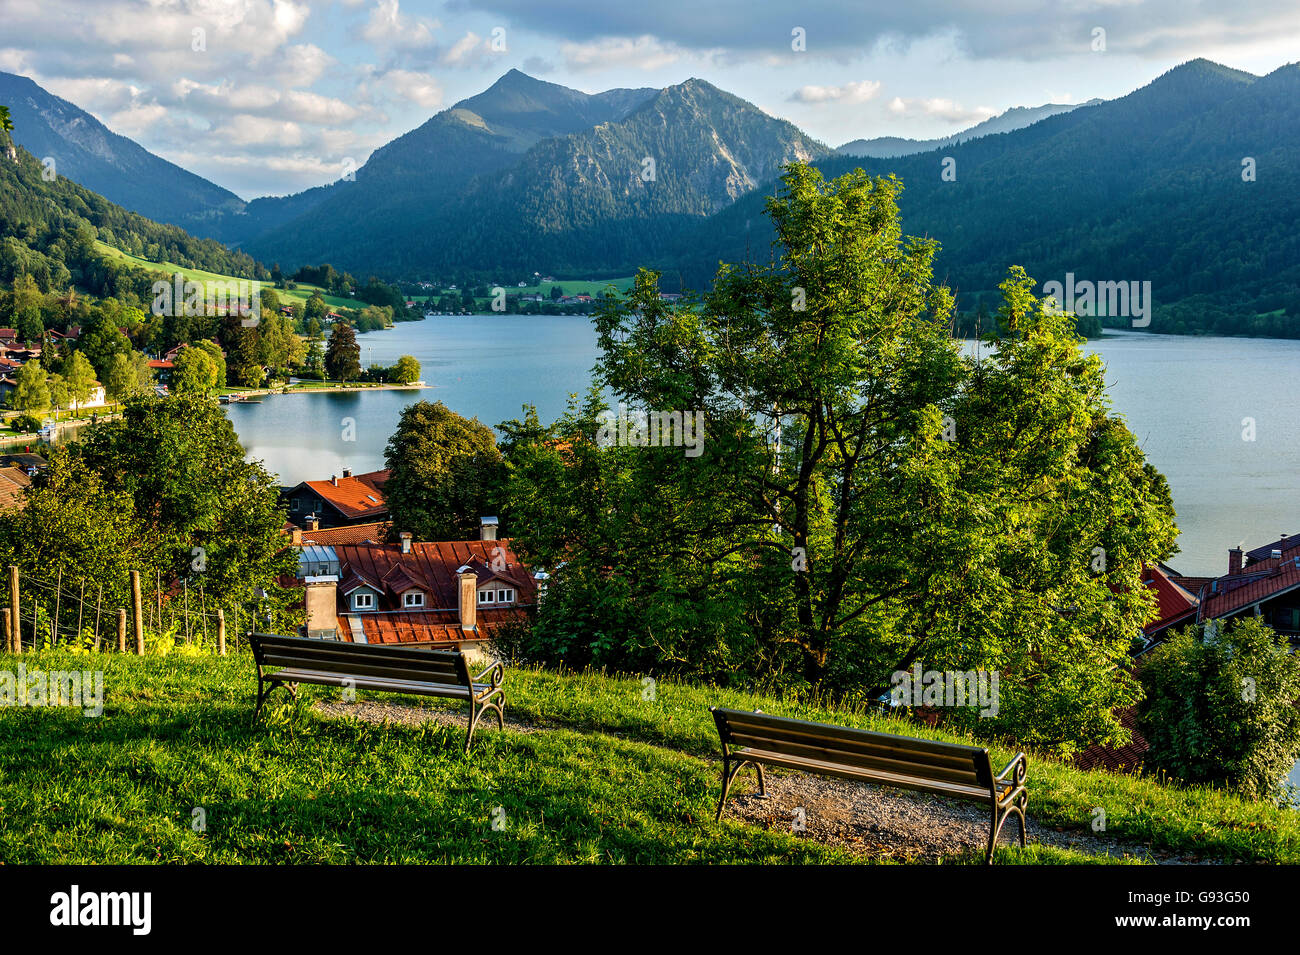 View of the village and Schliersee, Brecherspitz Mountain, Schliersee Mountains, Mangfall Mountains, Bavarian Pre-Alps Stock Photo